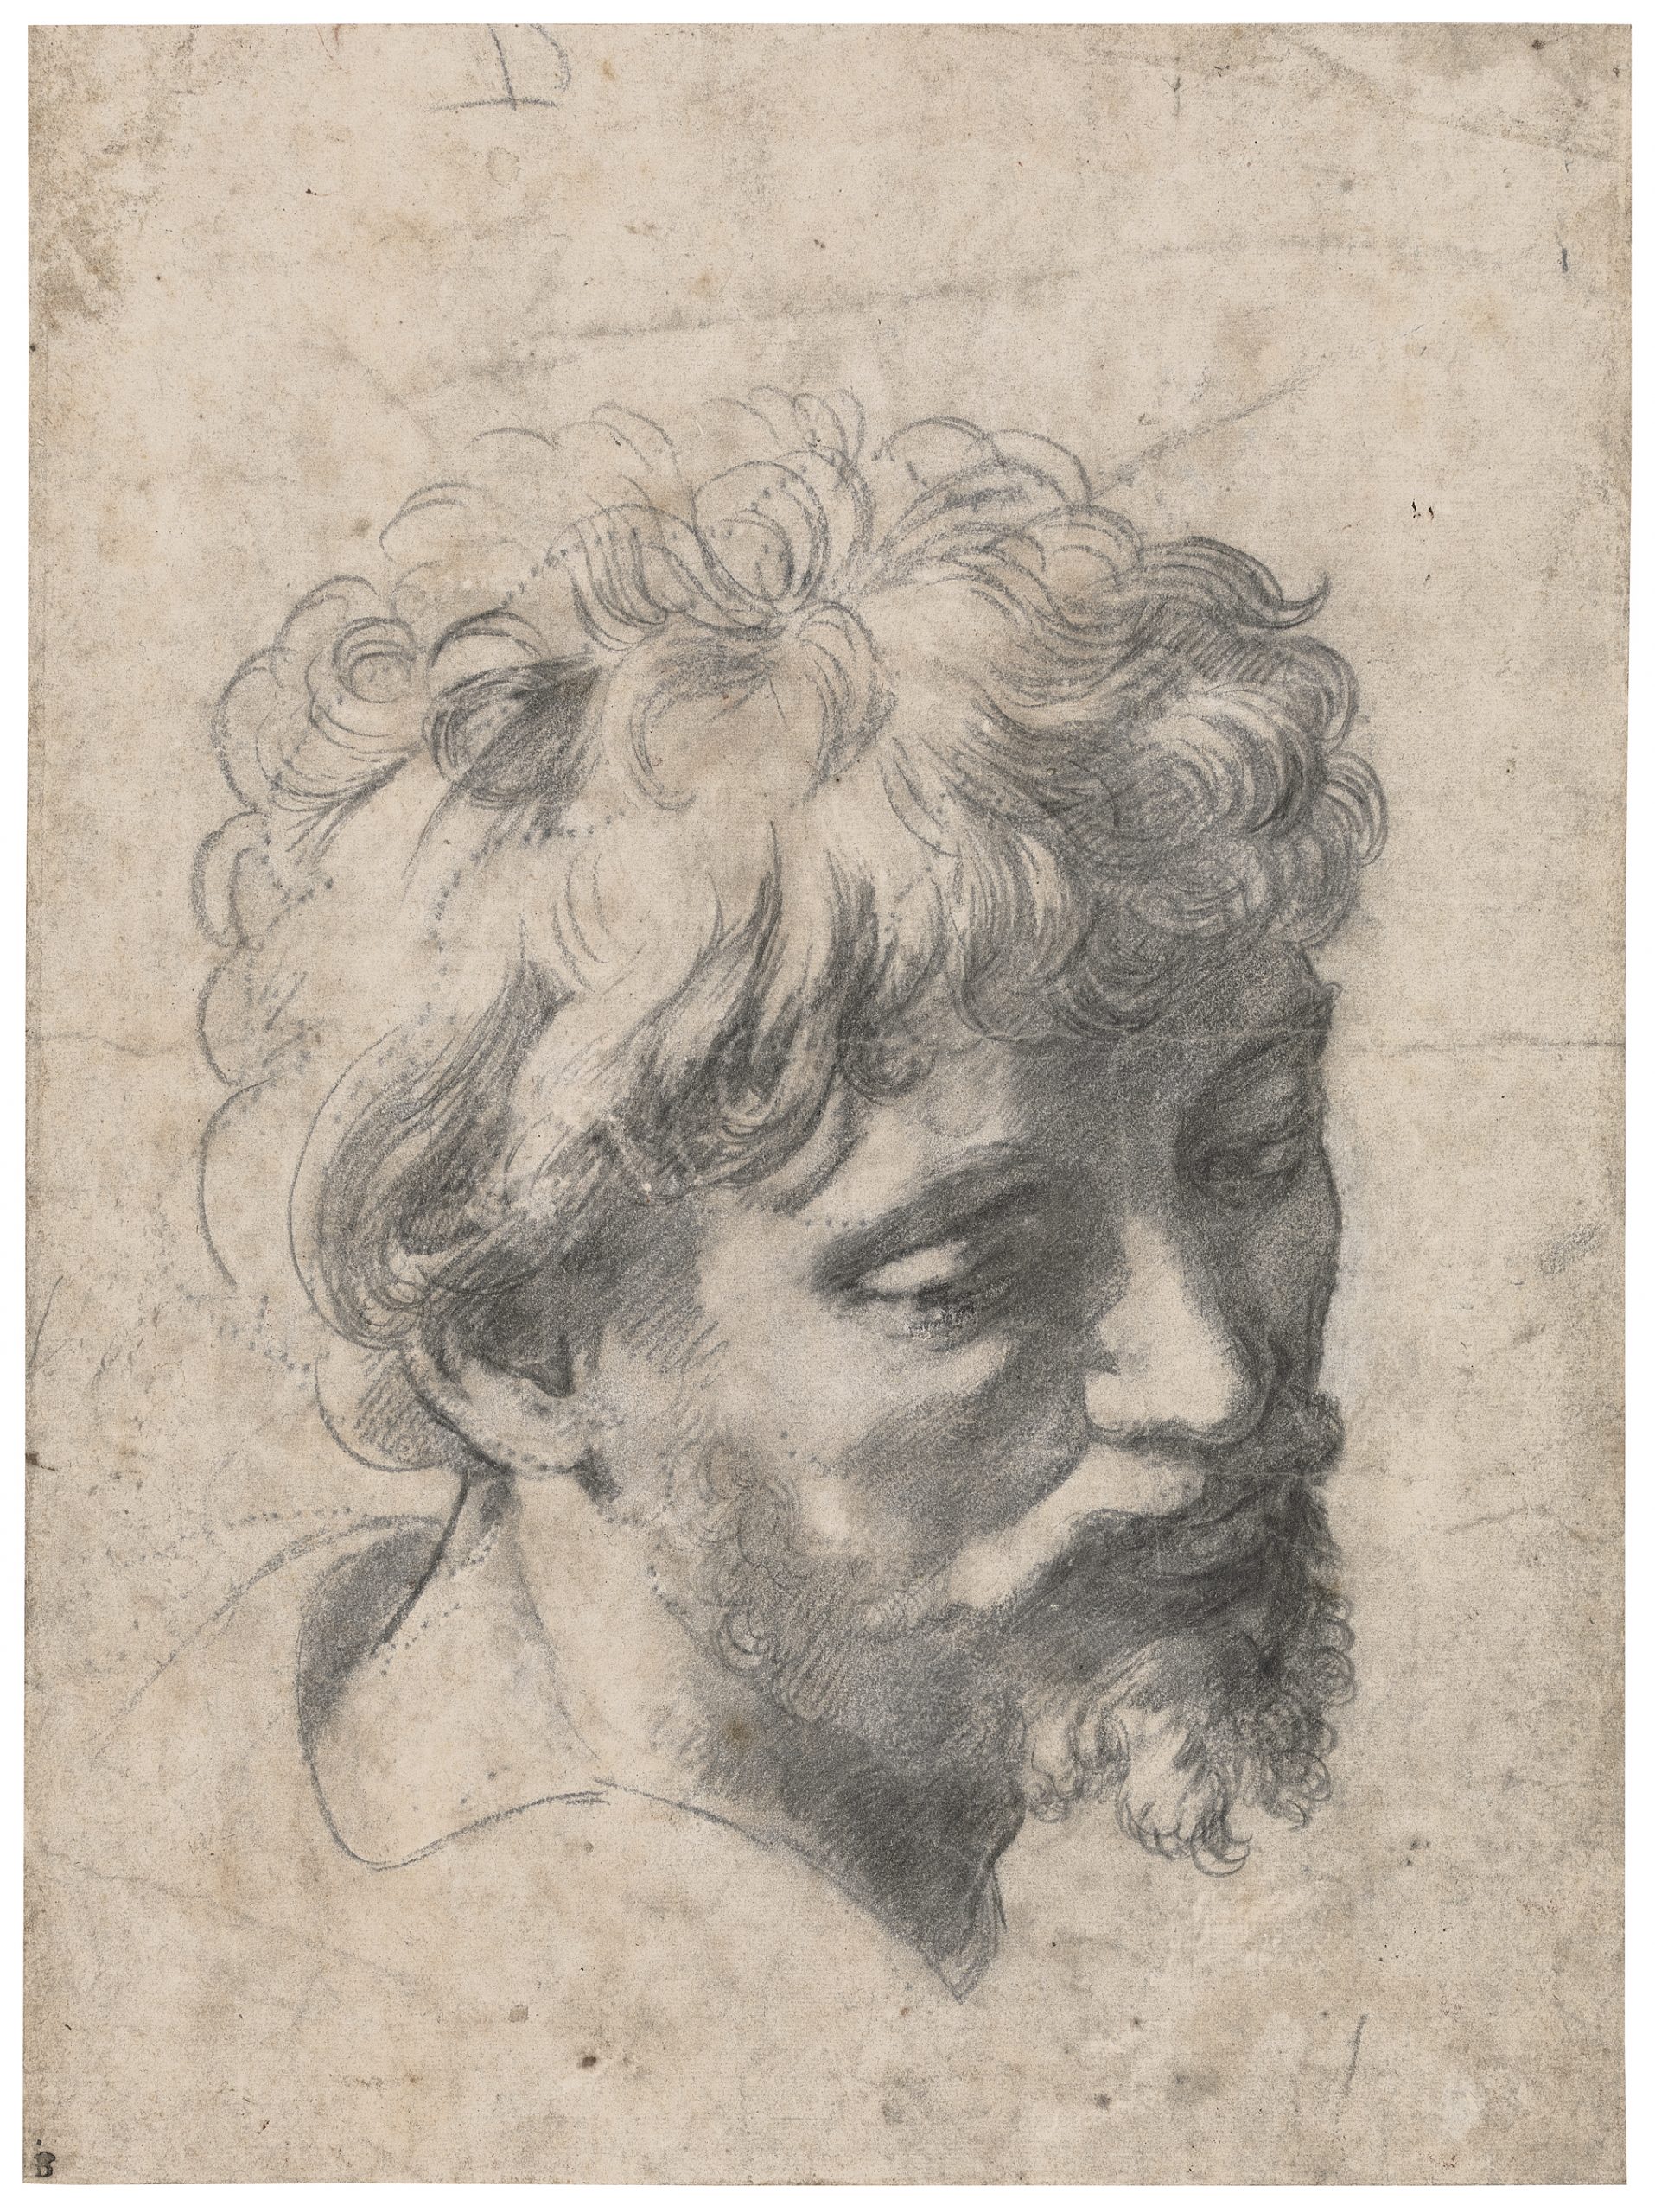 Raphael, Study for the Head of an Apostle in the Transfiguration, Private Collection, New York, © Private Collection